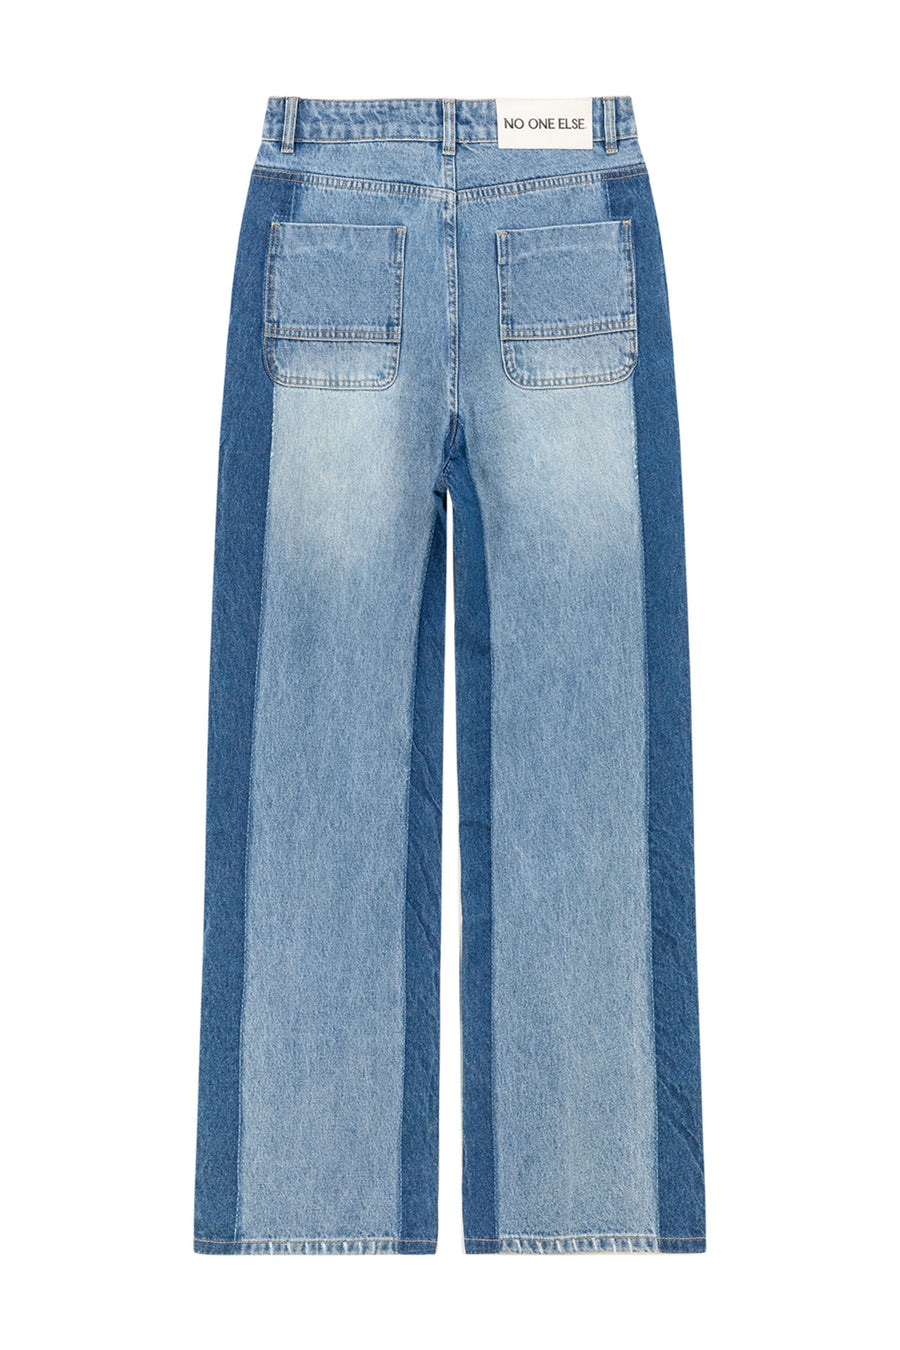 CHUU Washed Distressed Wide Jeans